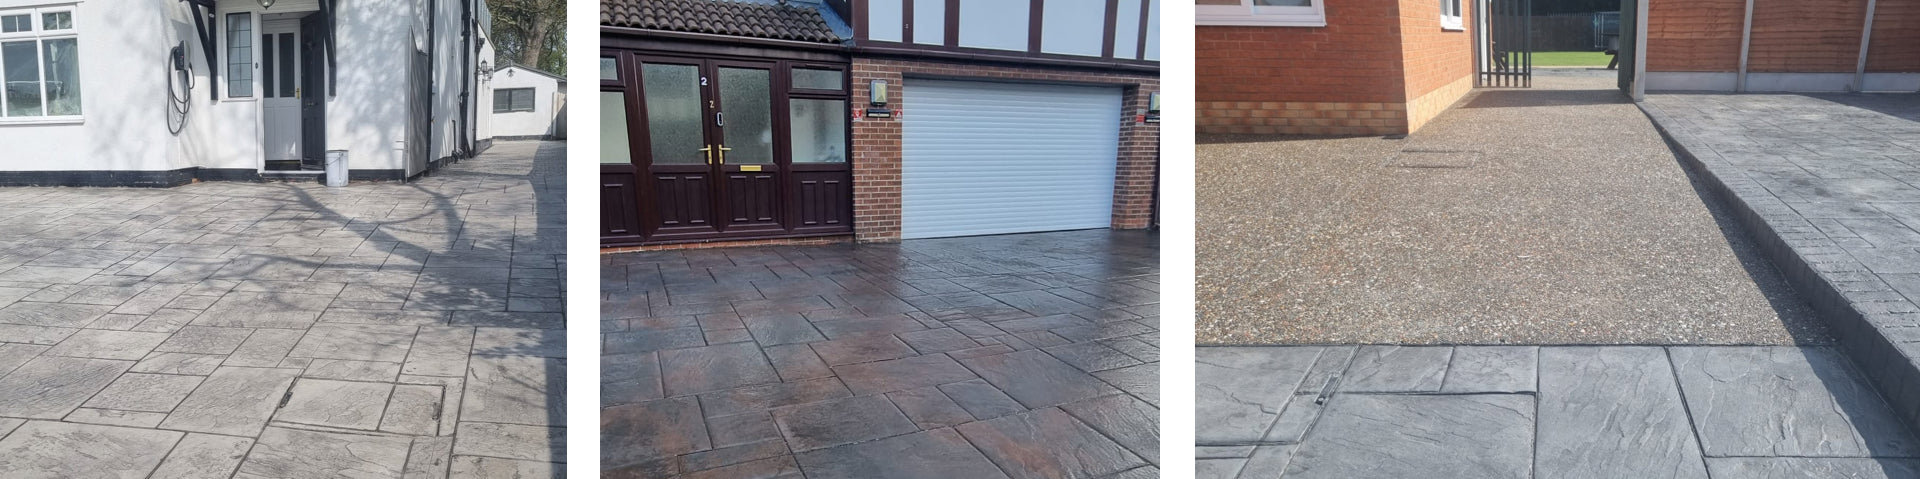 Northumberland Patterned Concrete Services